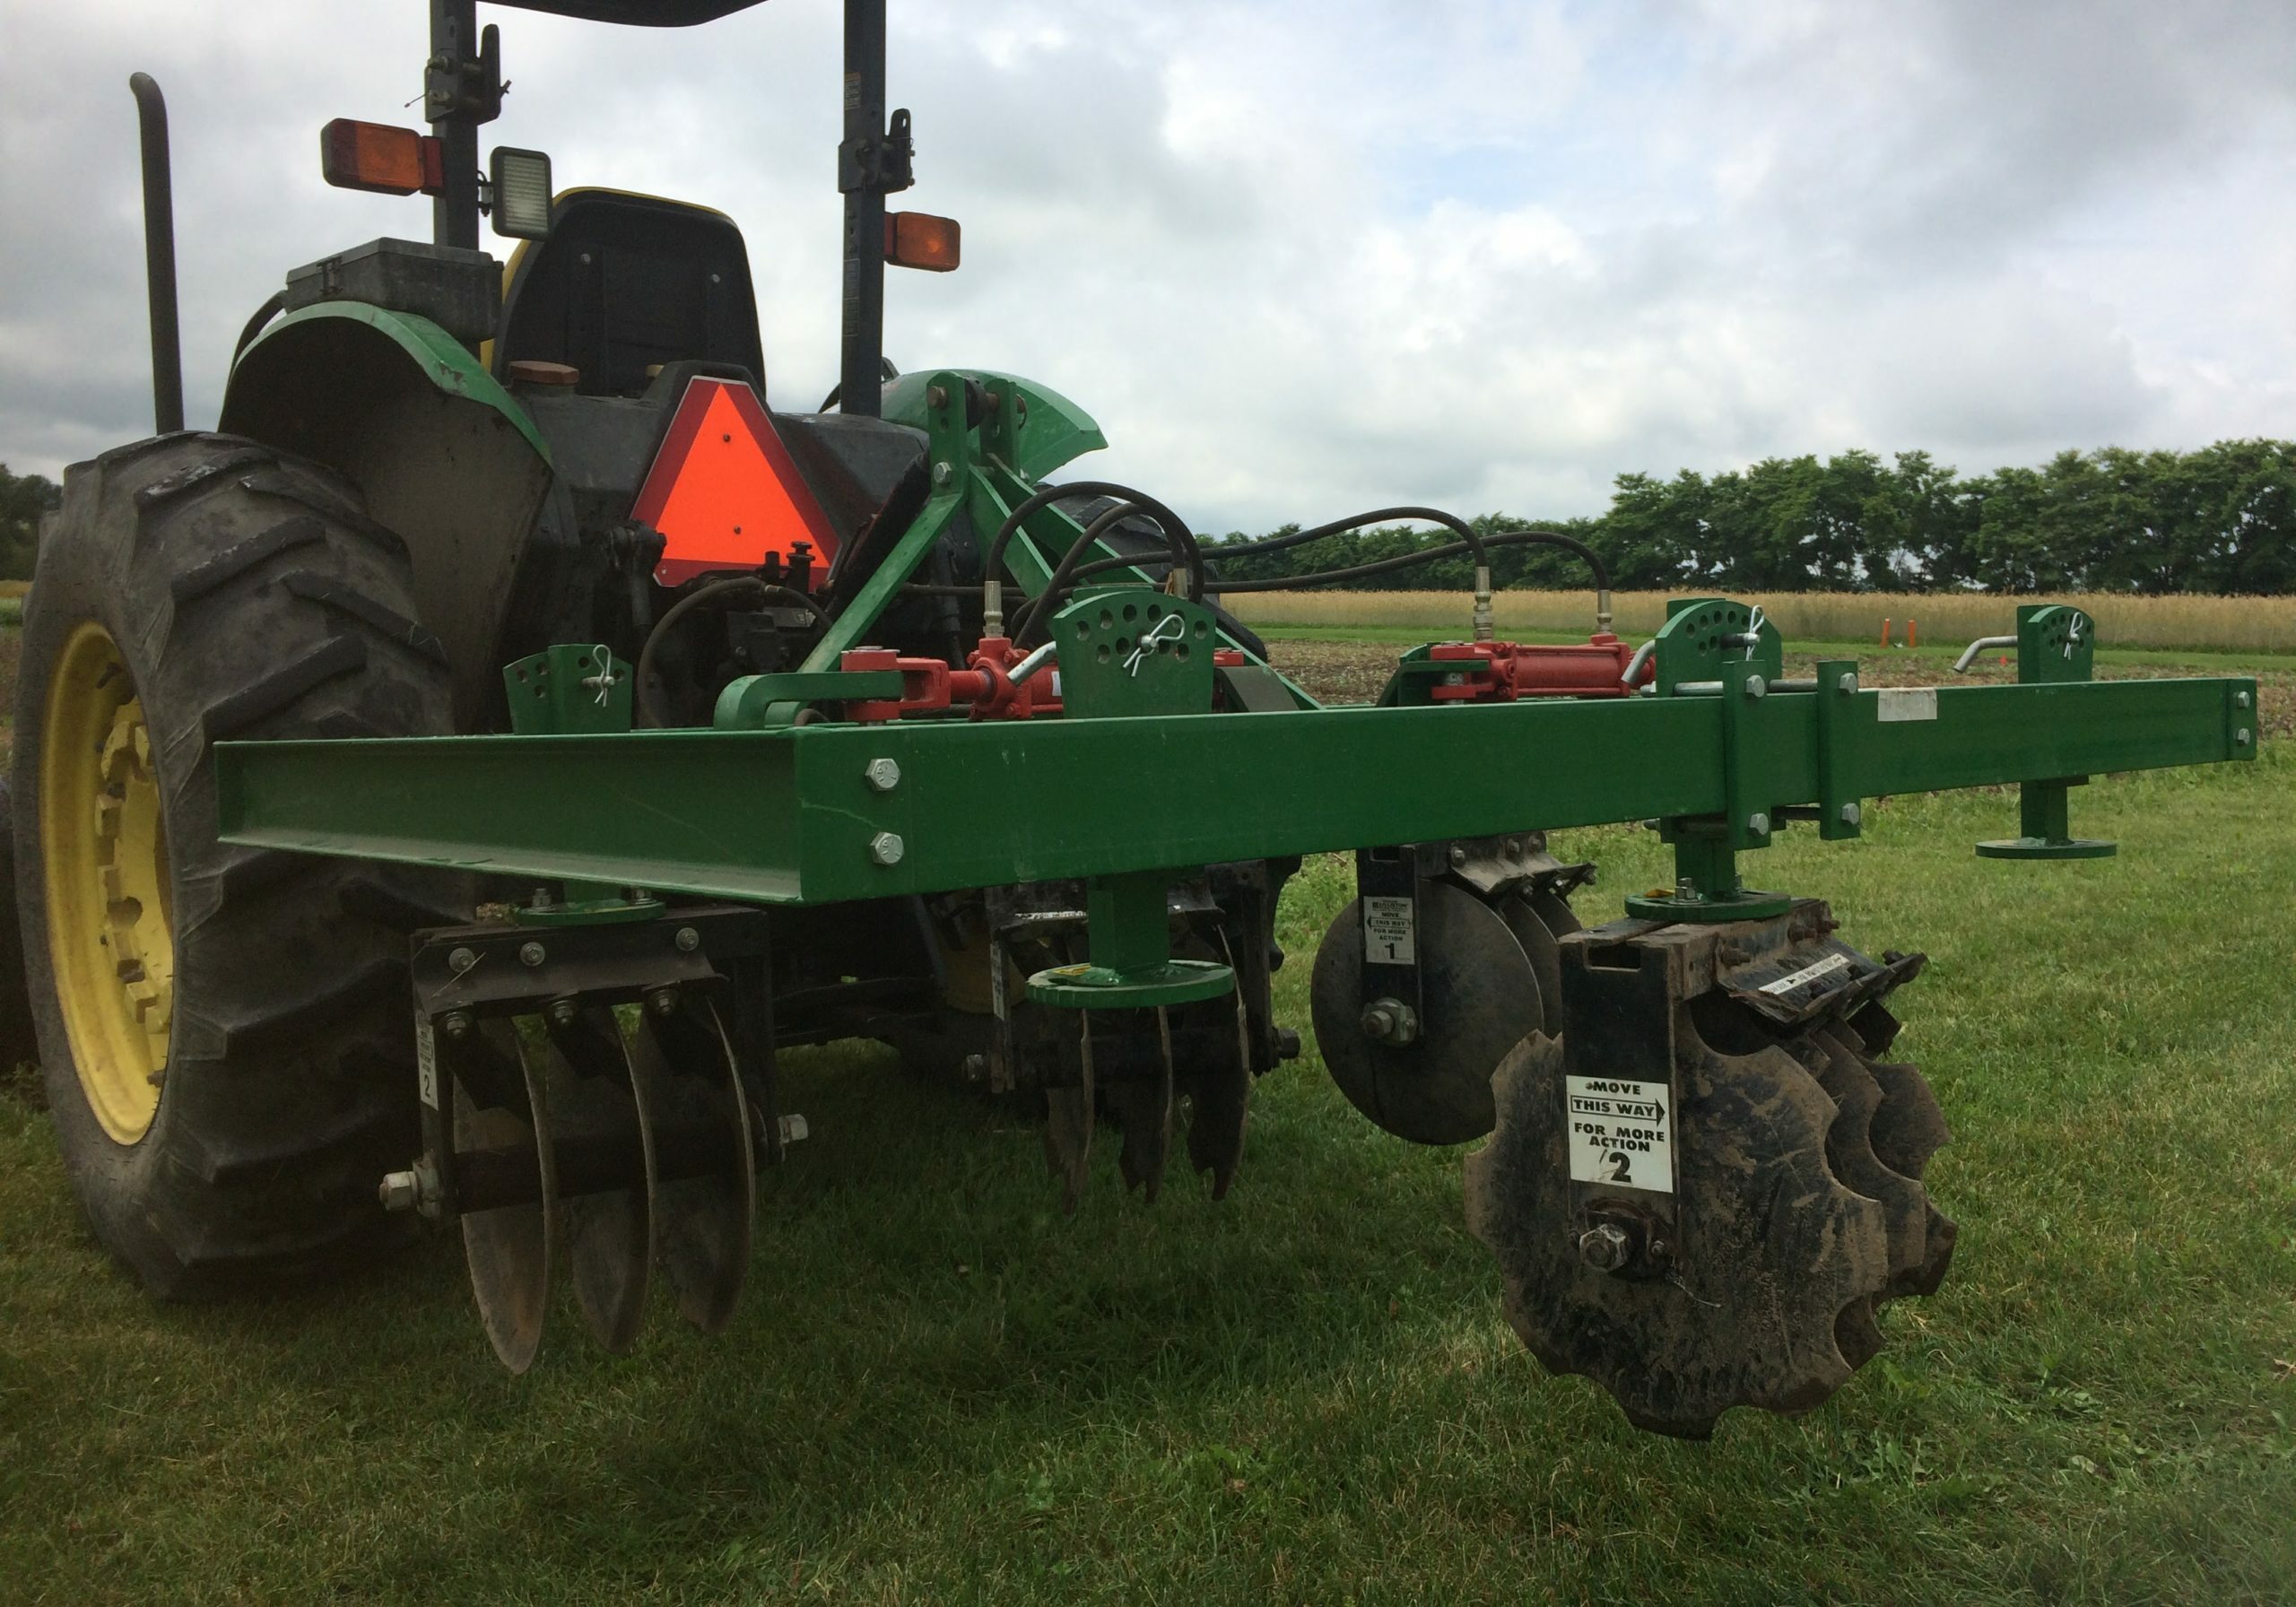 Cover crop mulches don't provide season long weed suppression so having a plan for weed escapes is critical. Rolling cultivator tools can work to kill weeds that emerge from within mulch. 